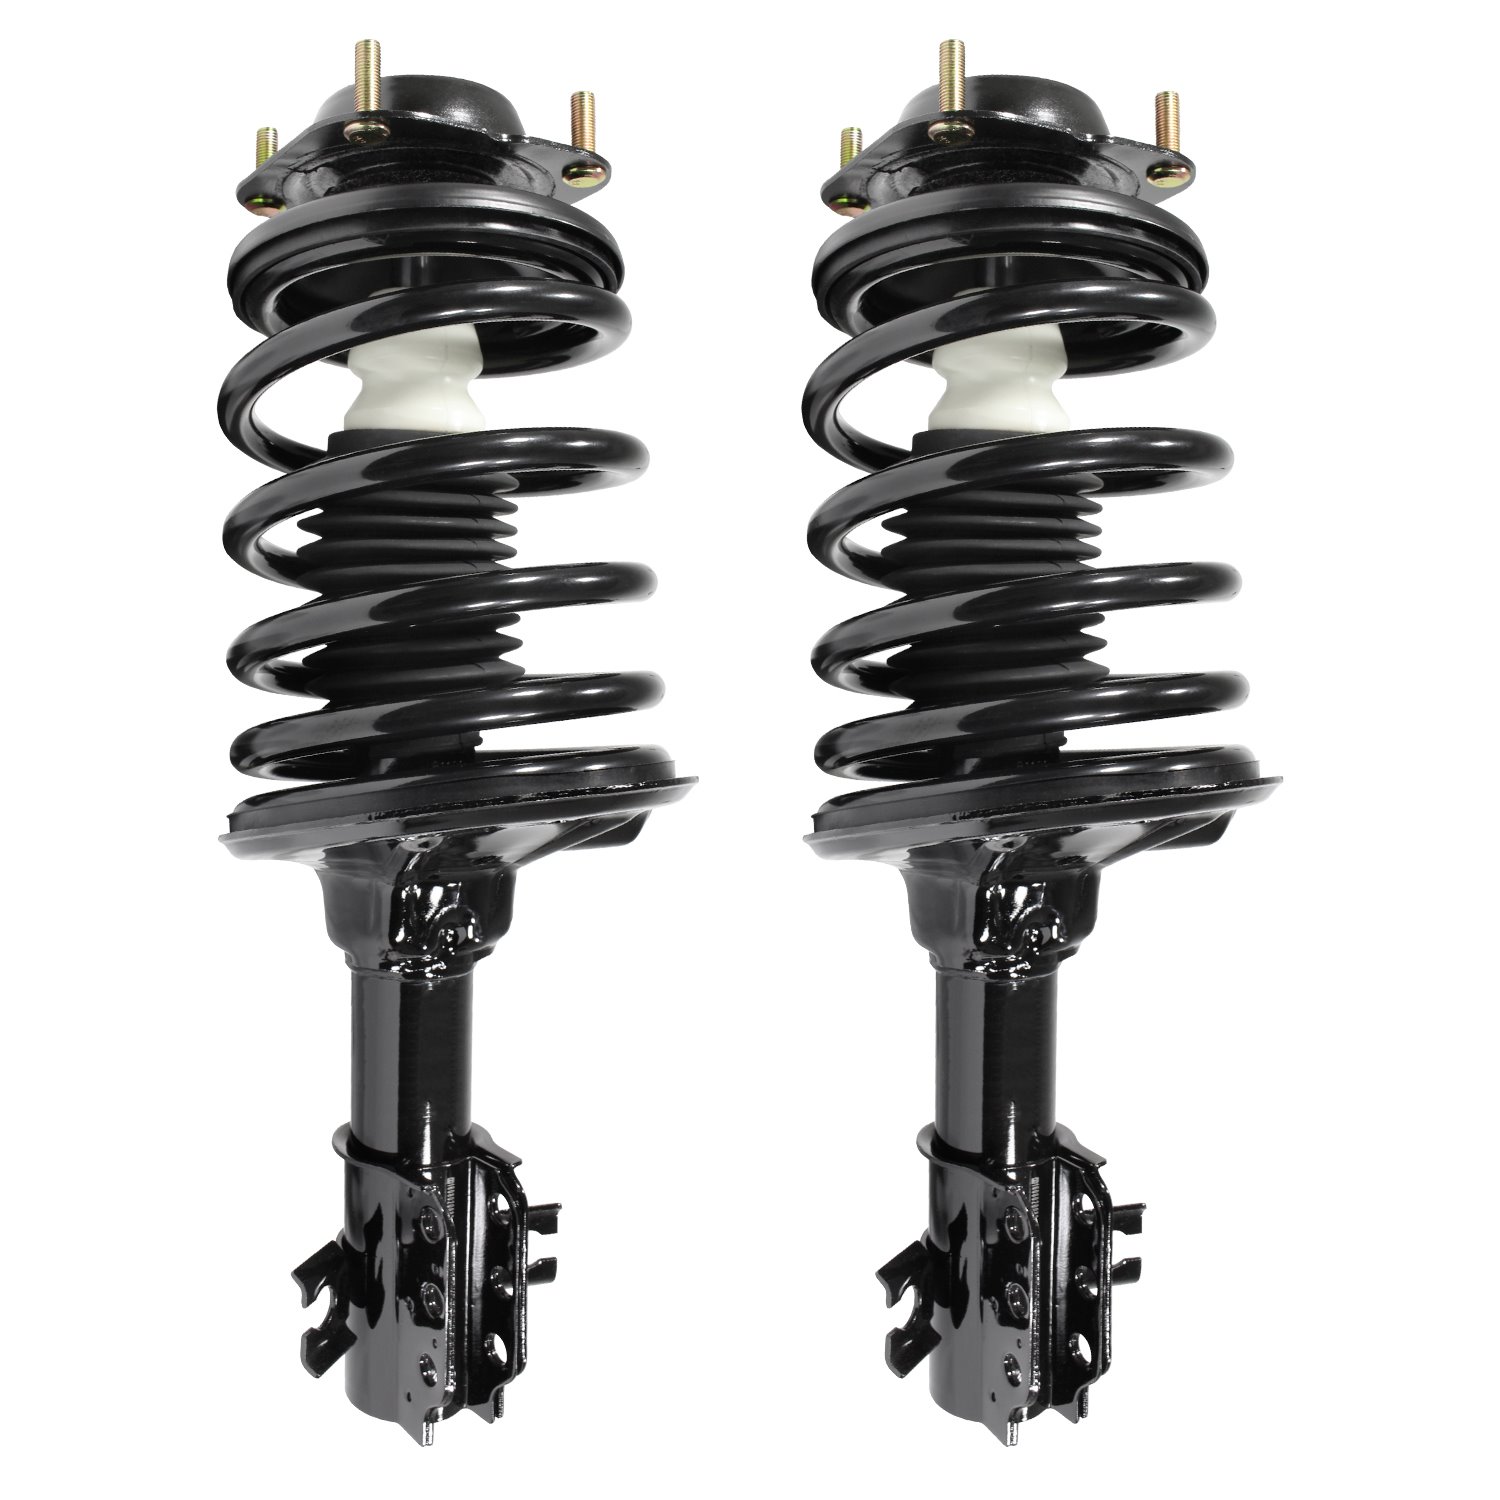 2-11120-001 Suspension Strut & Coil Spring Assembly Set Fits Select Ford Escort, Mercury Tracer